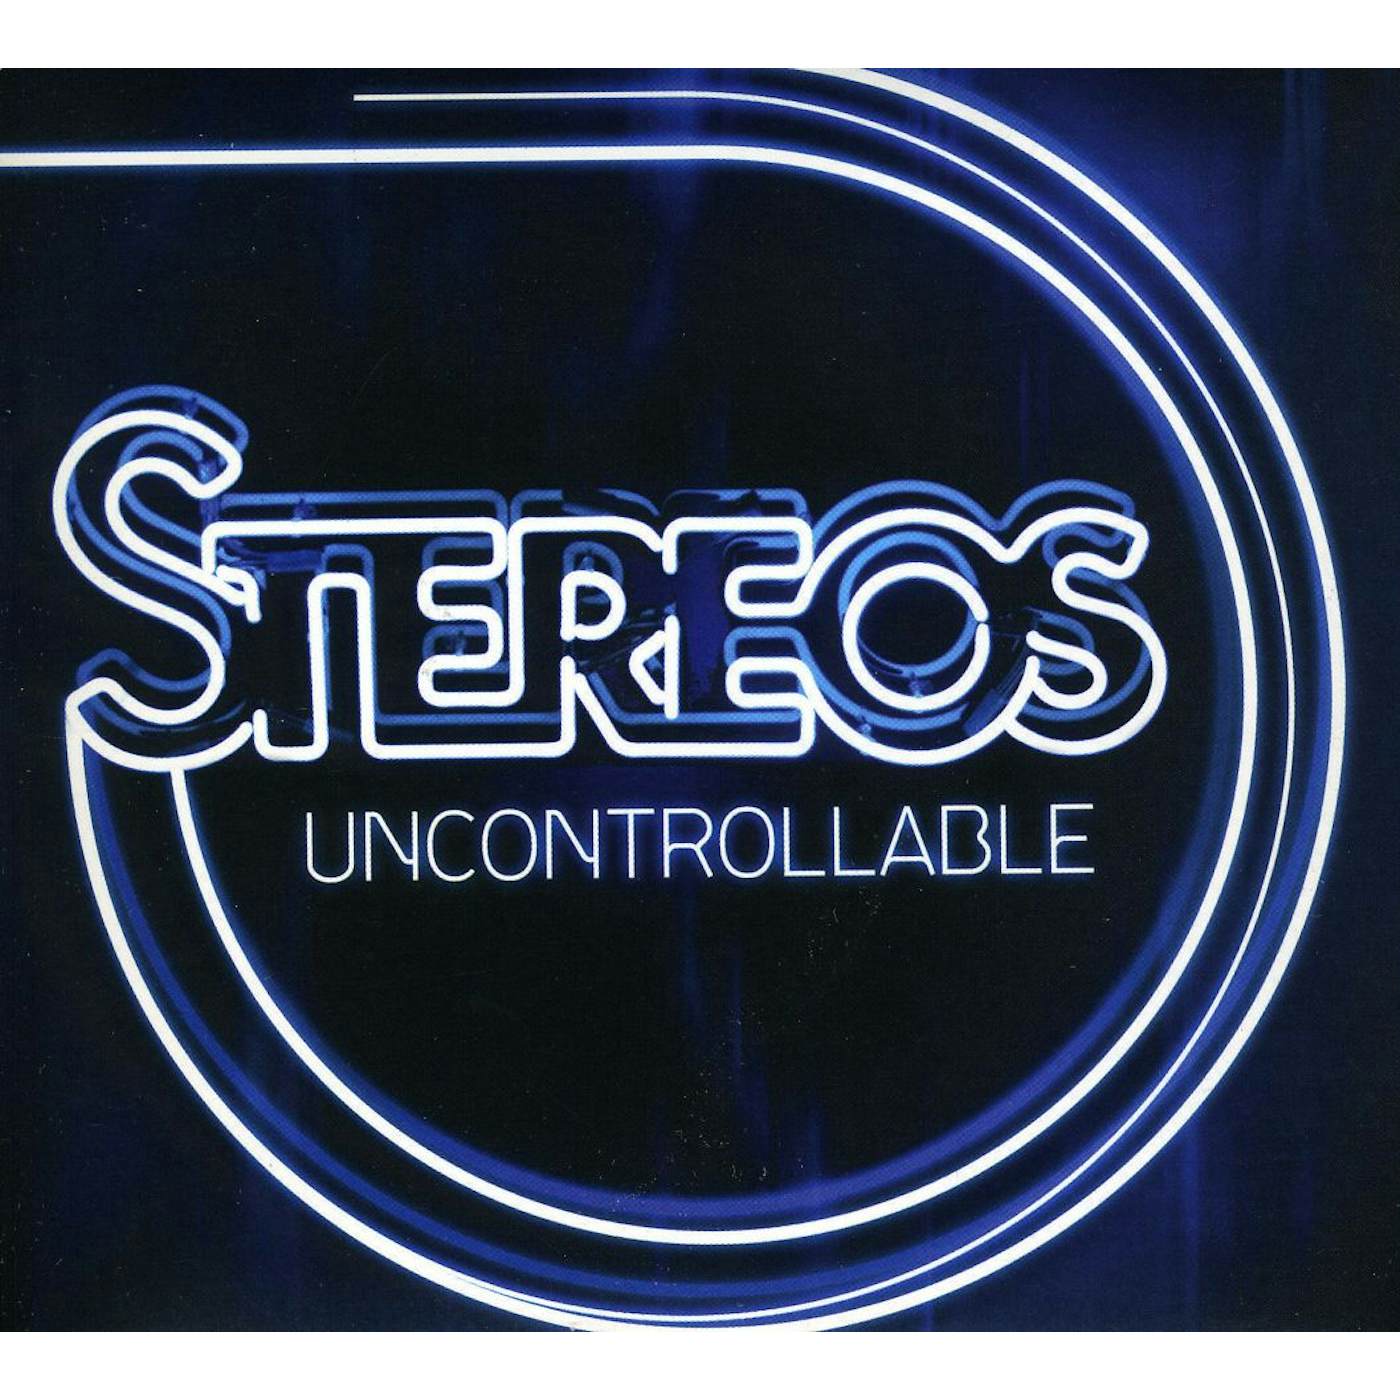 Stereos UNCONTROLLABLE CD